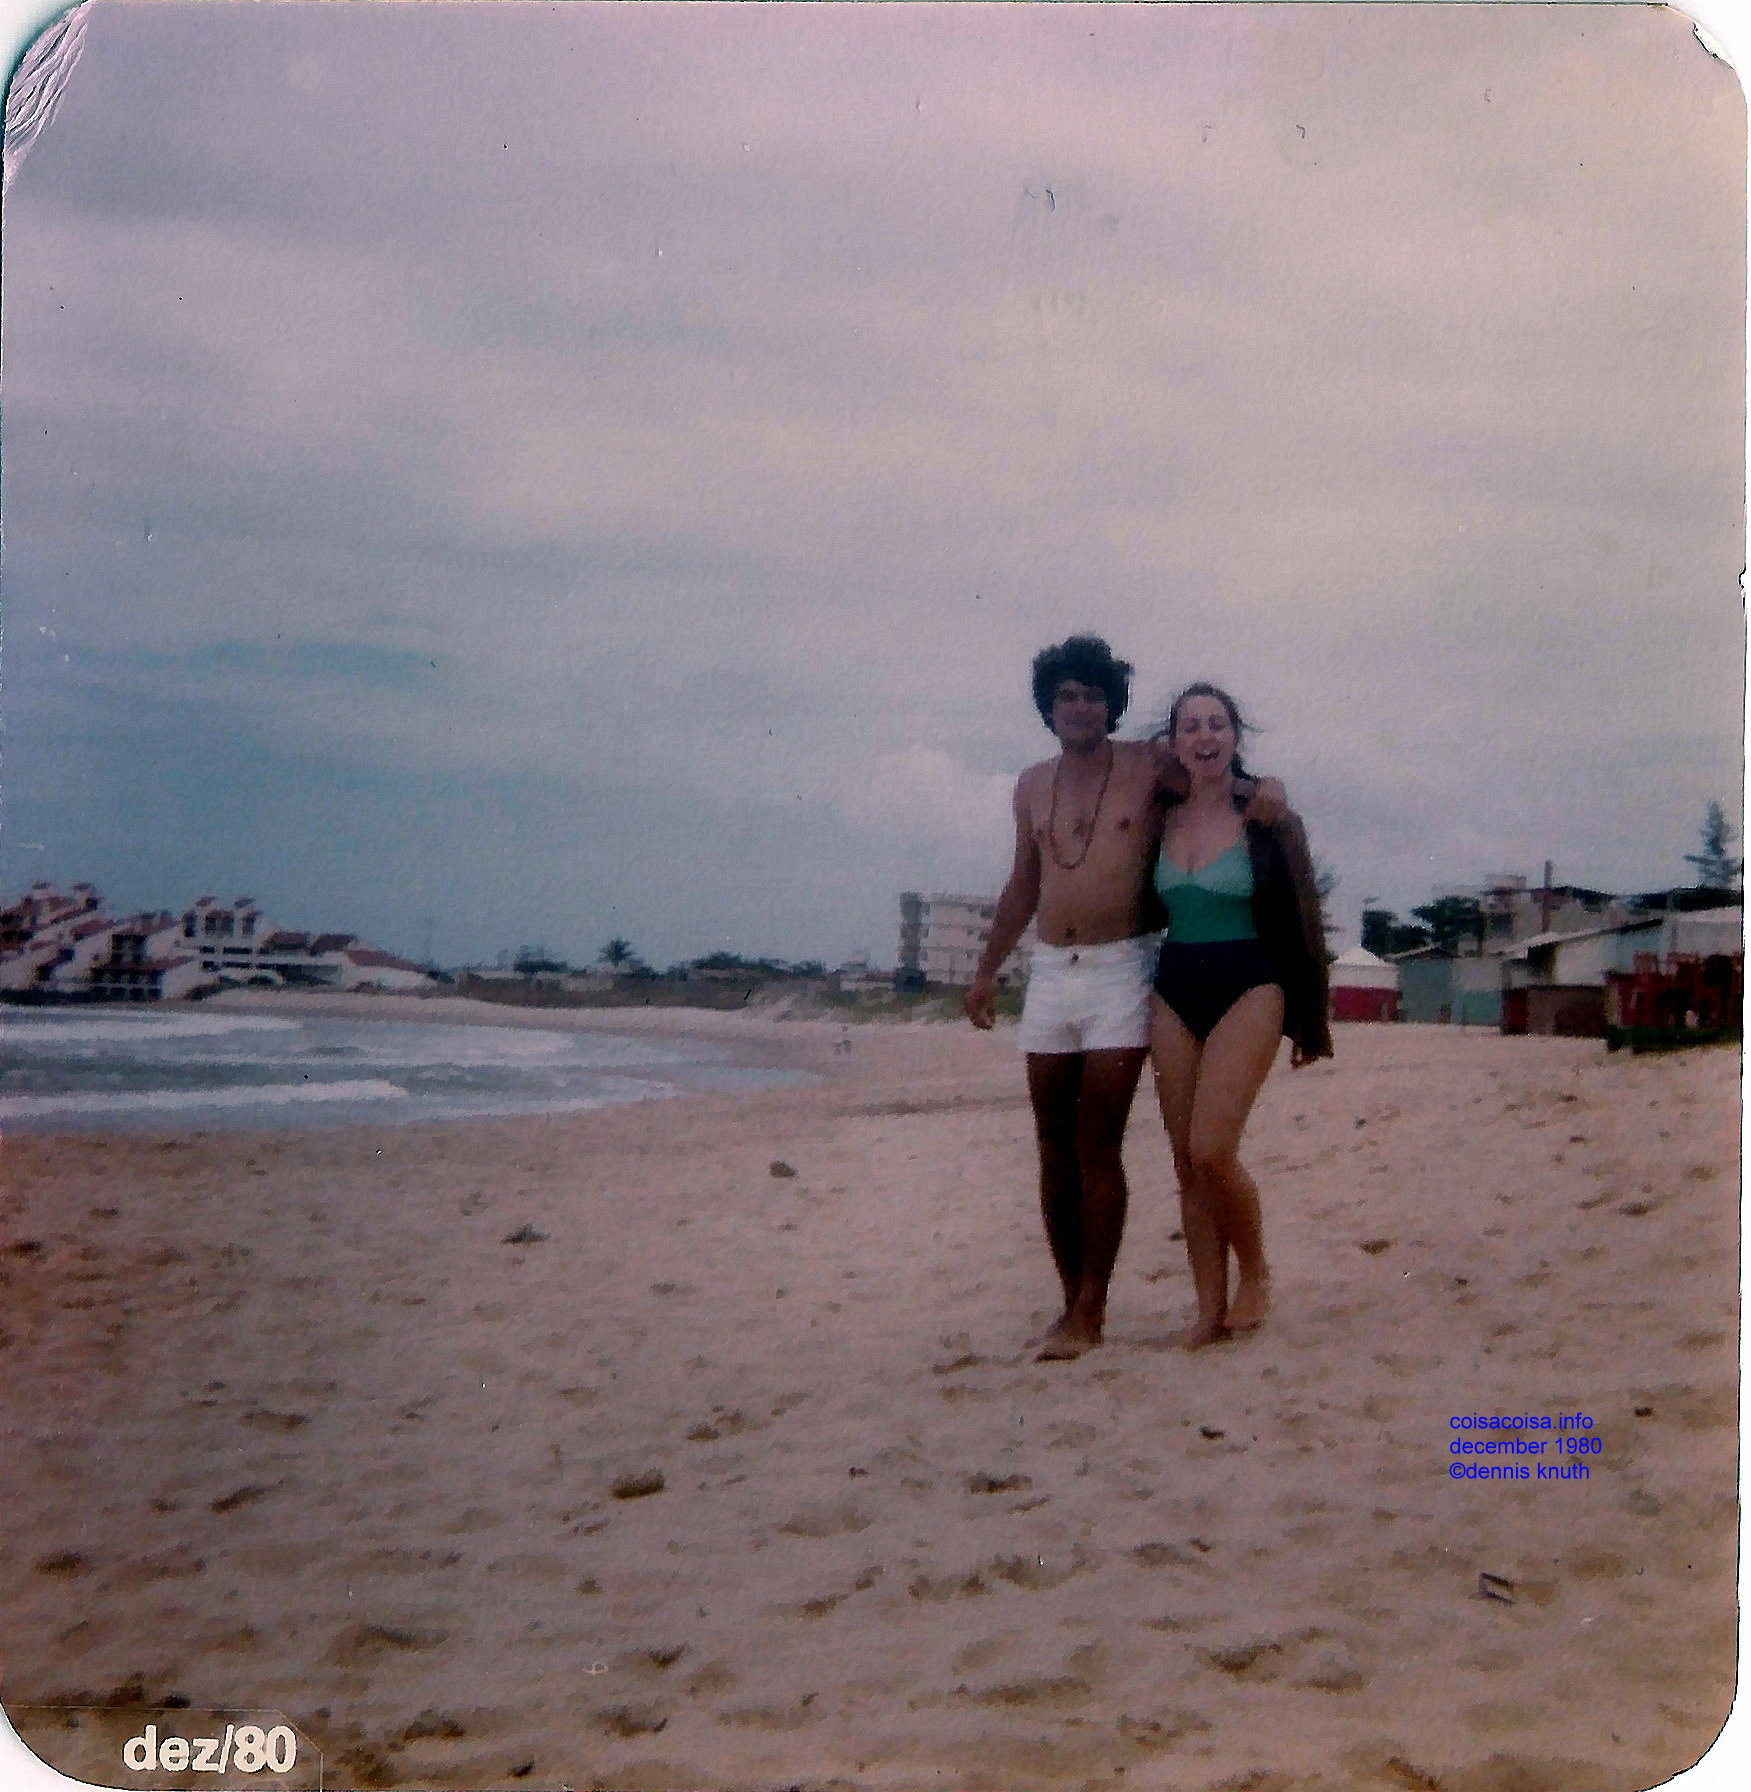 Helder and Anna on the Beach in 1980